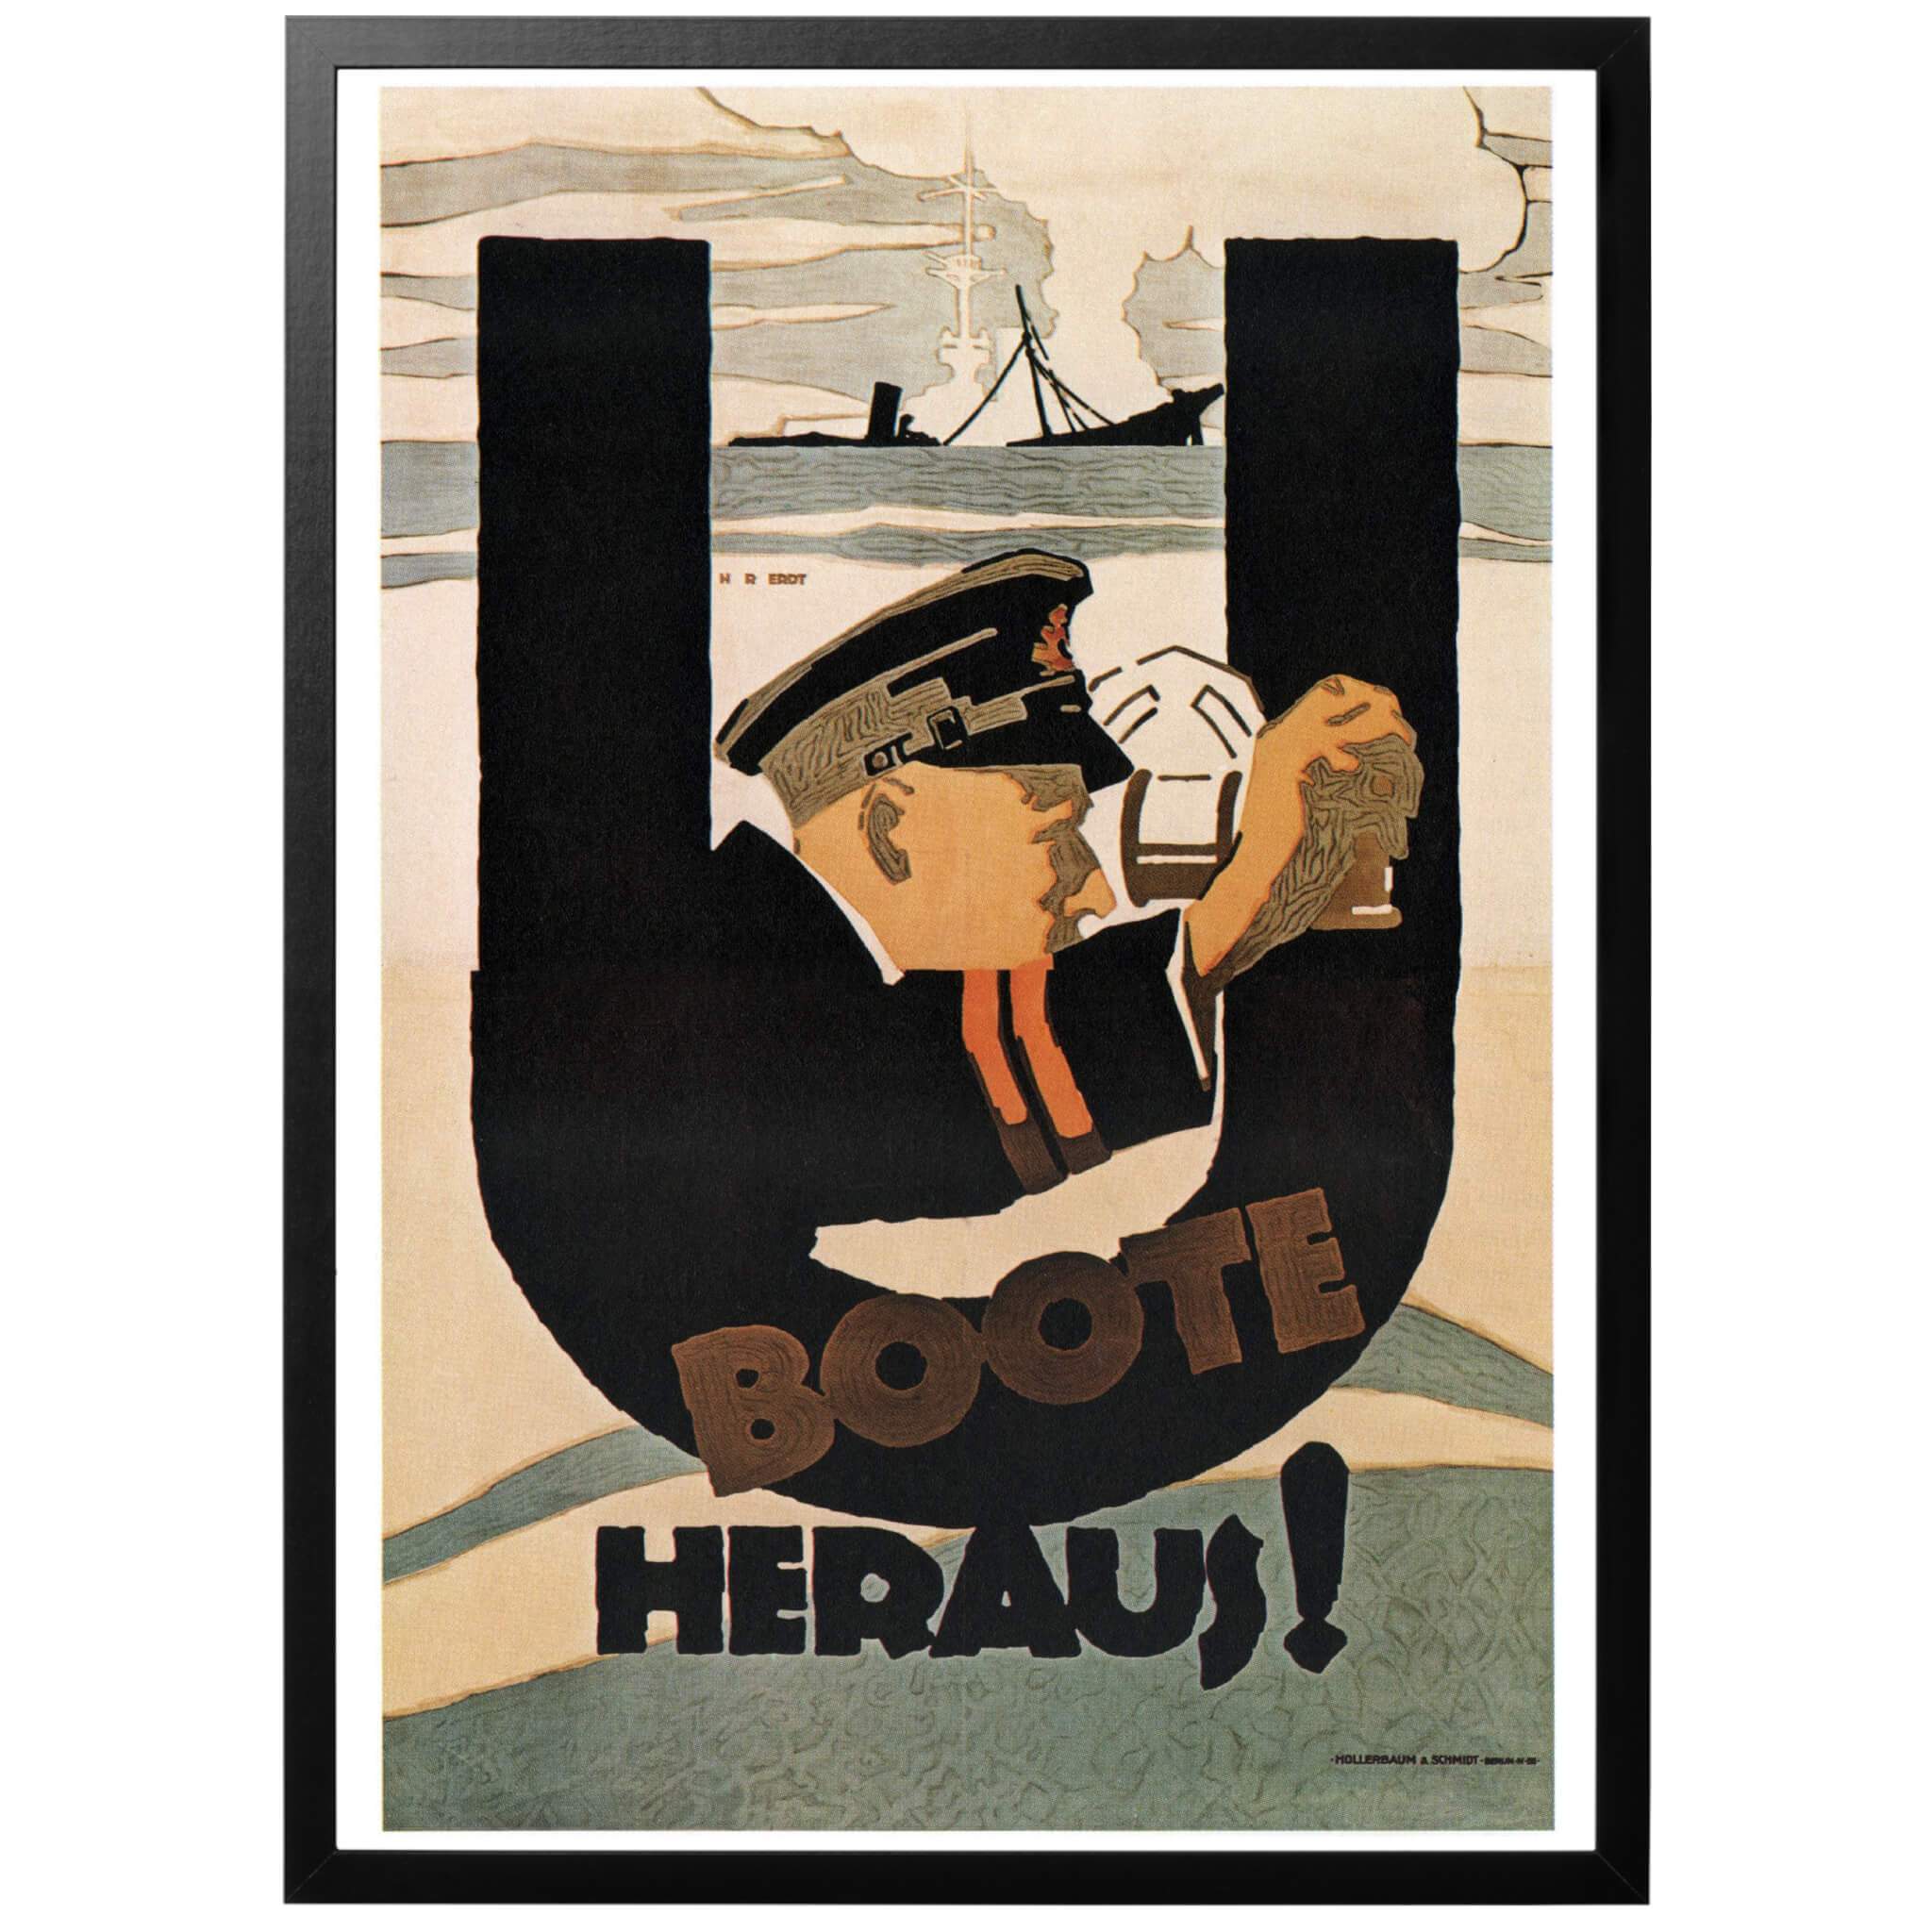 The U-boats are out! Poster